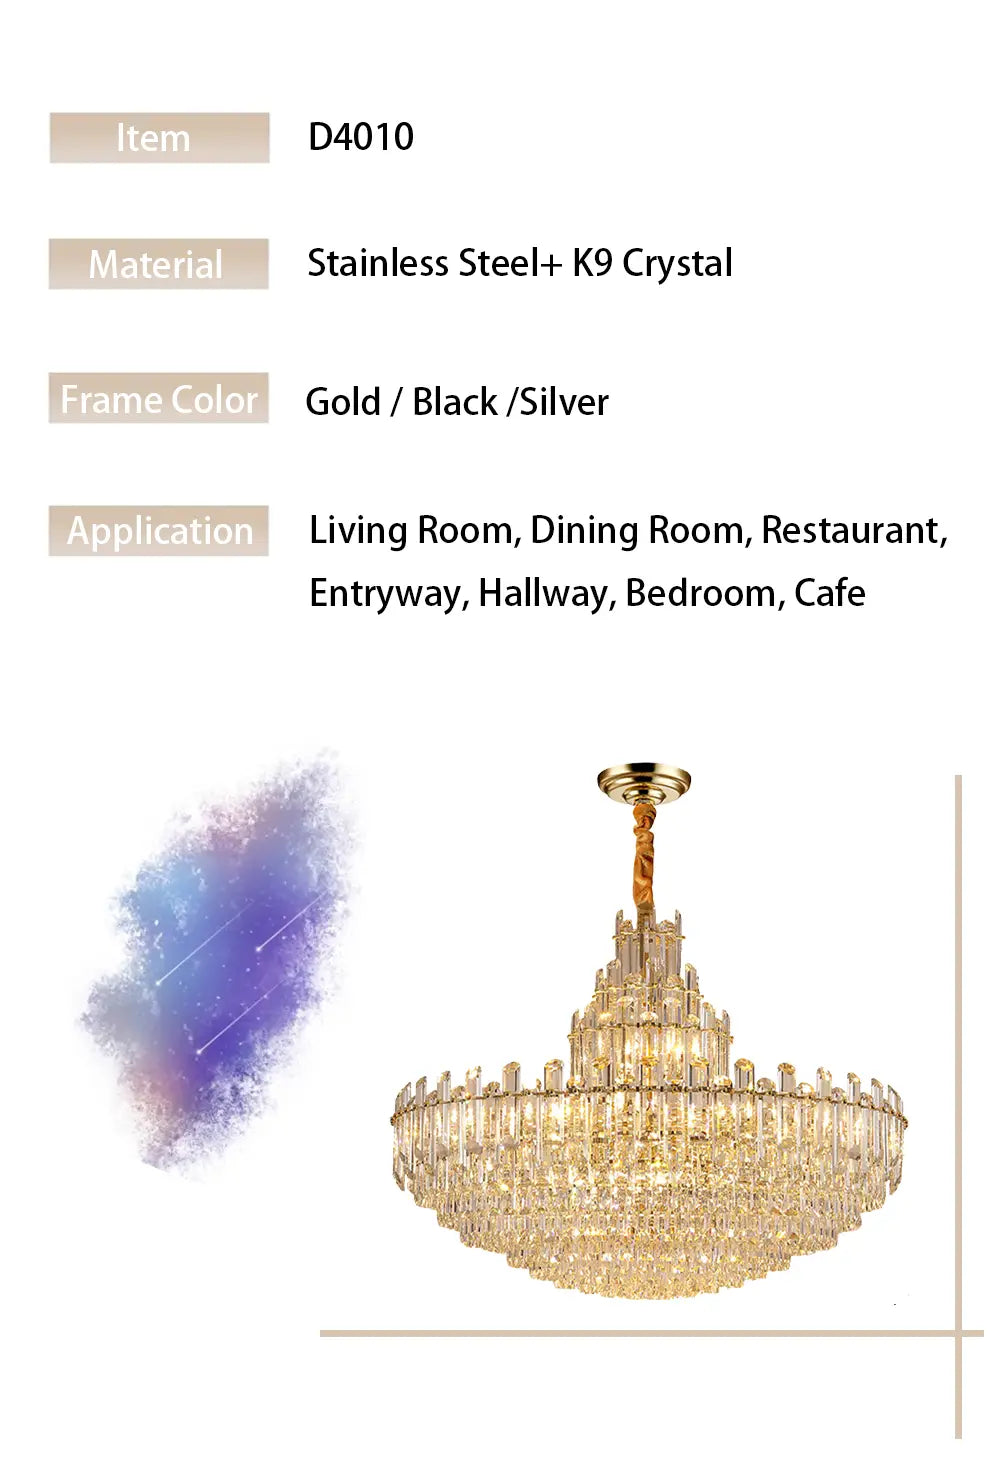 Luxury white Crystal Chandeliers for Living room, Dining